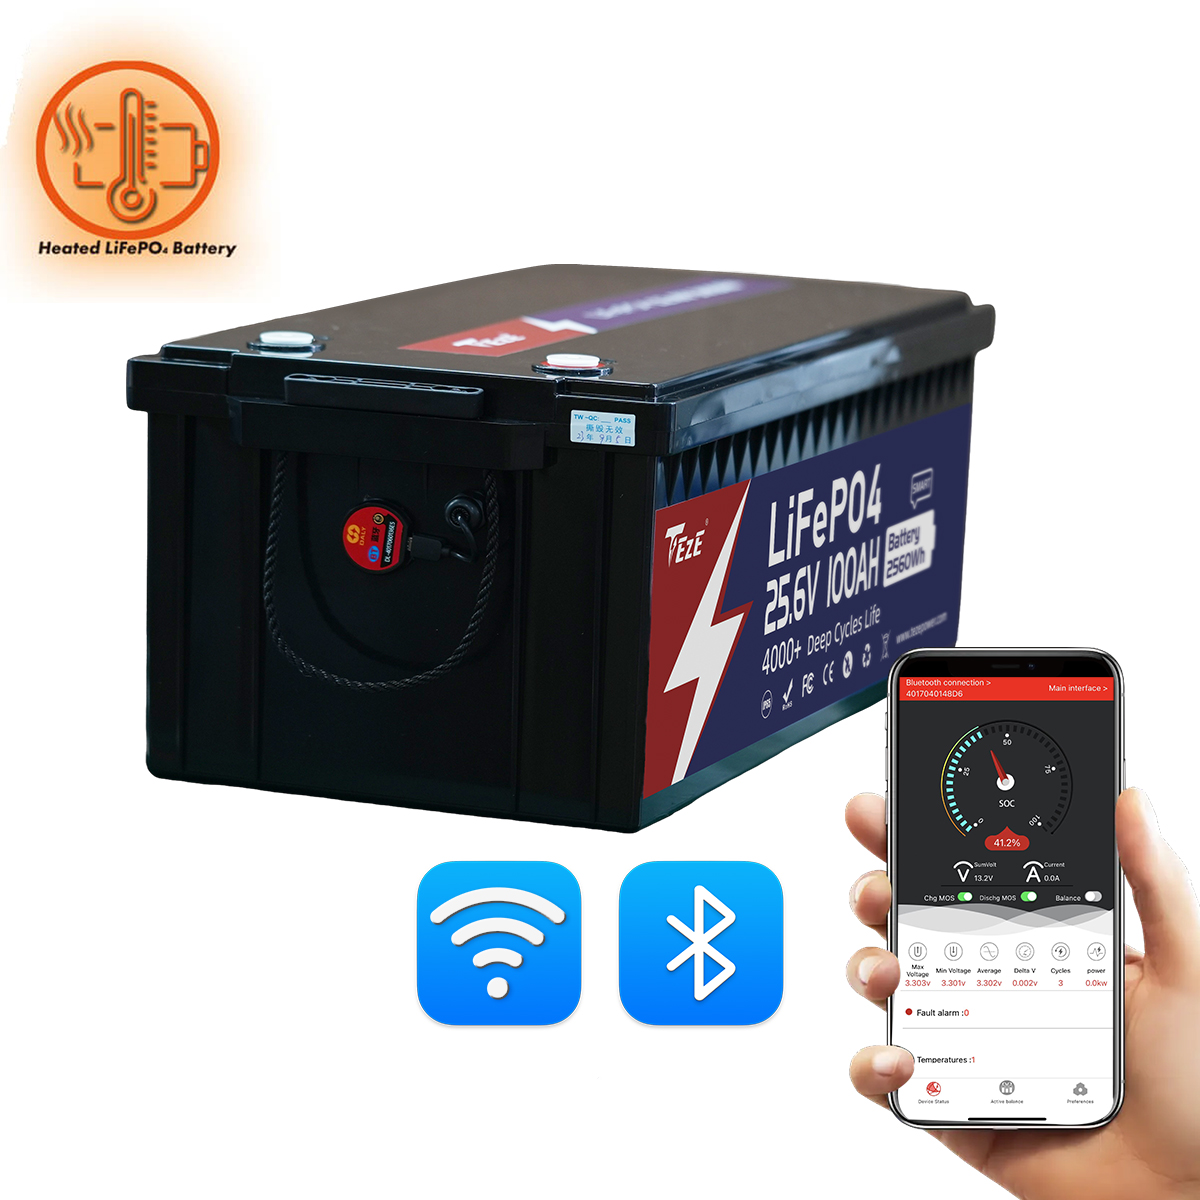 New Add WiFi-TezePower 24V 100Ah LiFePO4 Battery with WIFI and Bluetooth, Self-heating and Active Balancer, Built-in 100A Daly BMS(WIFI External Version)